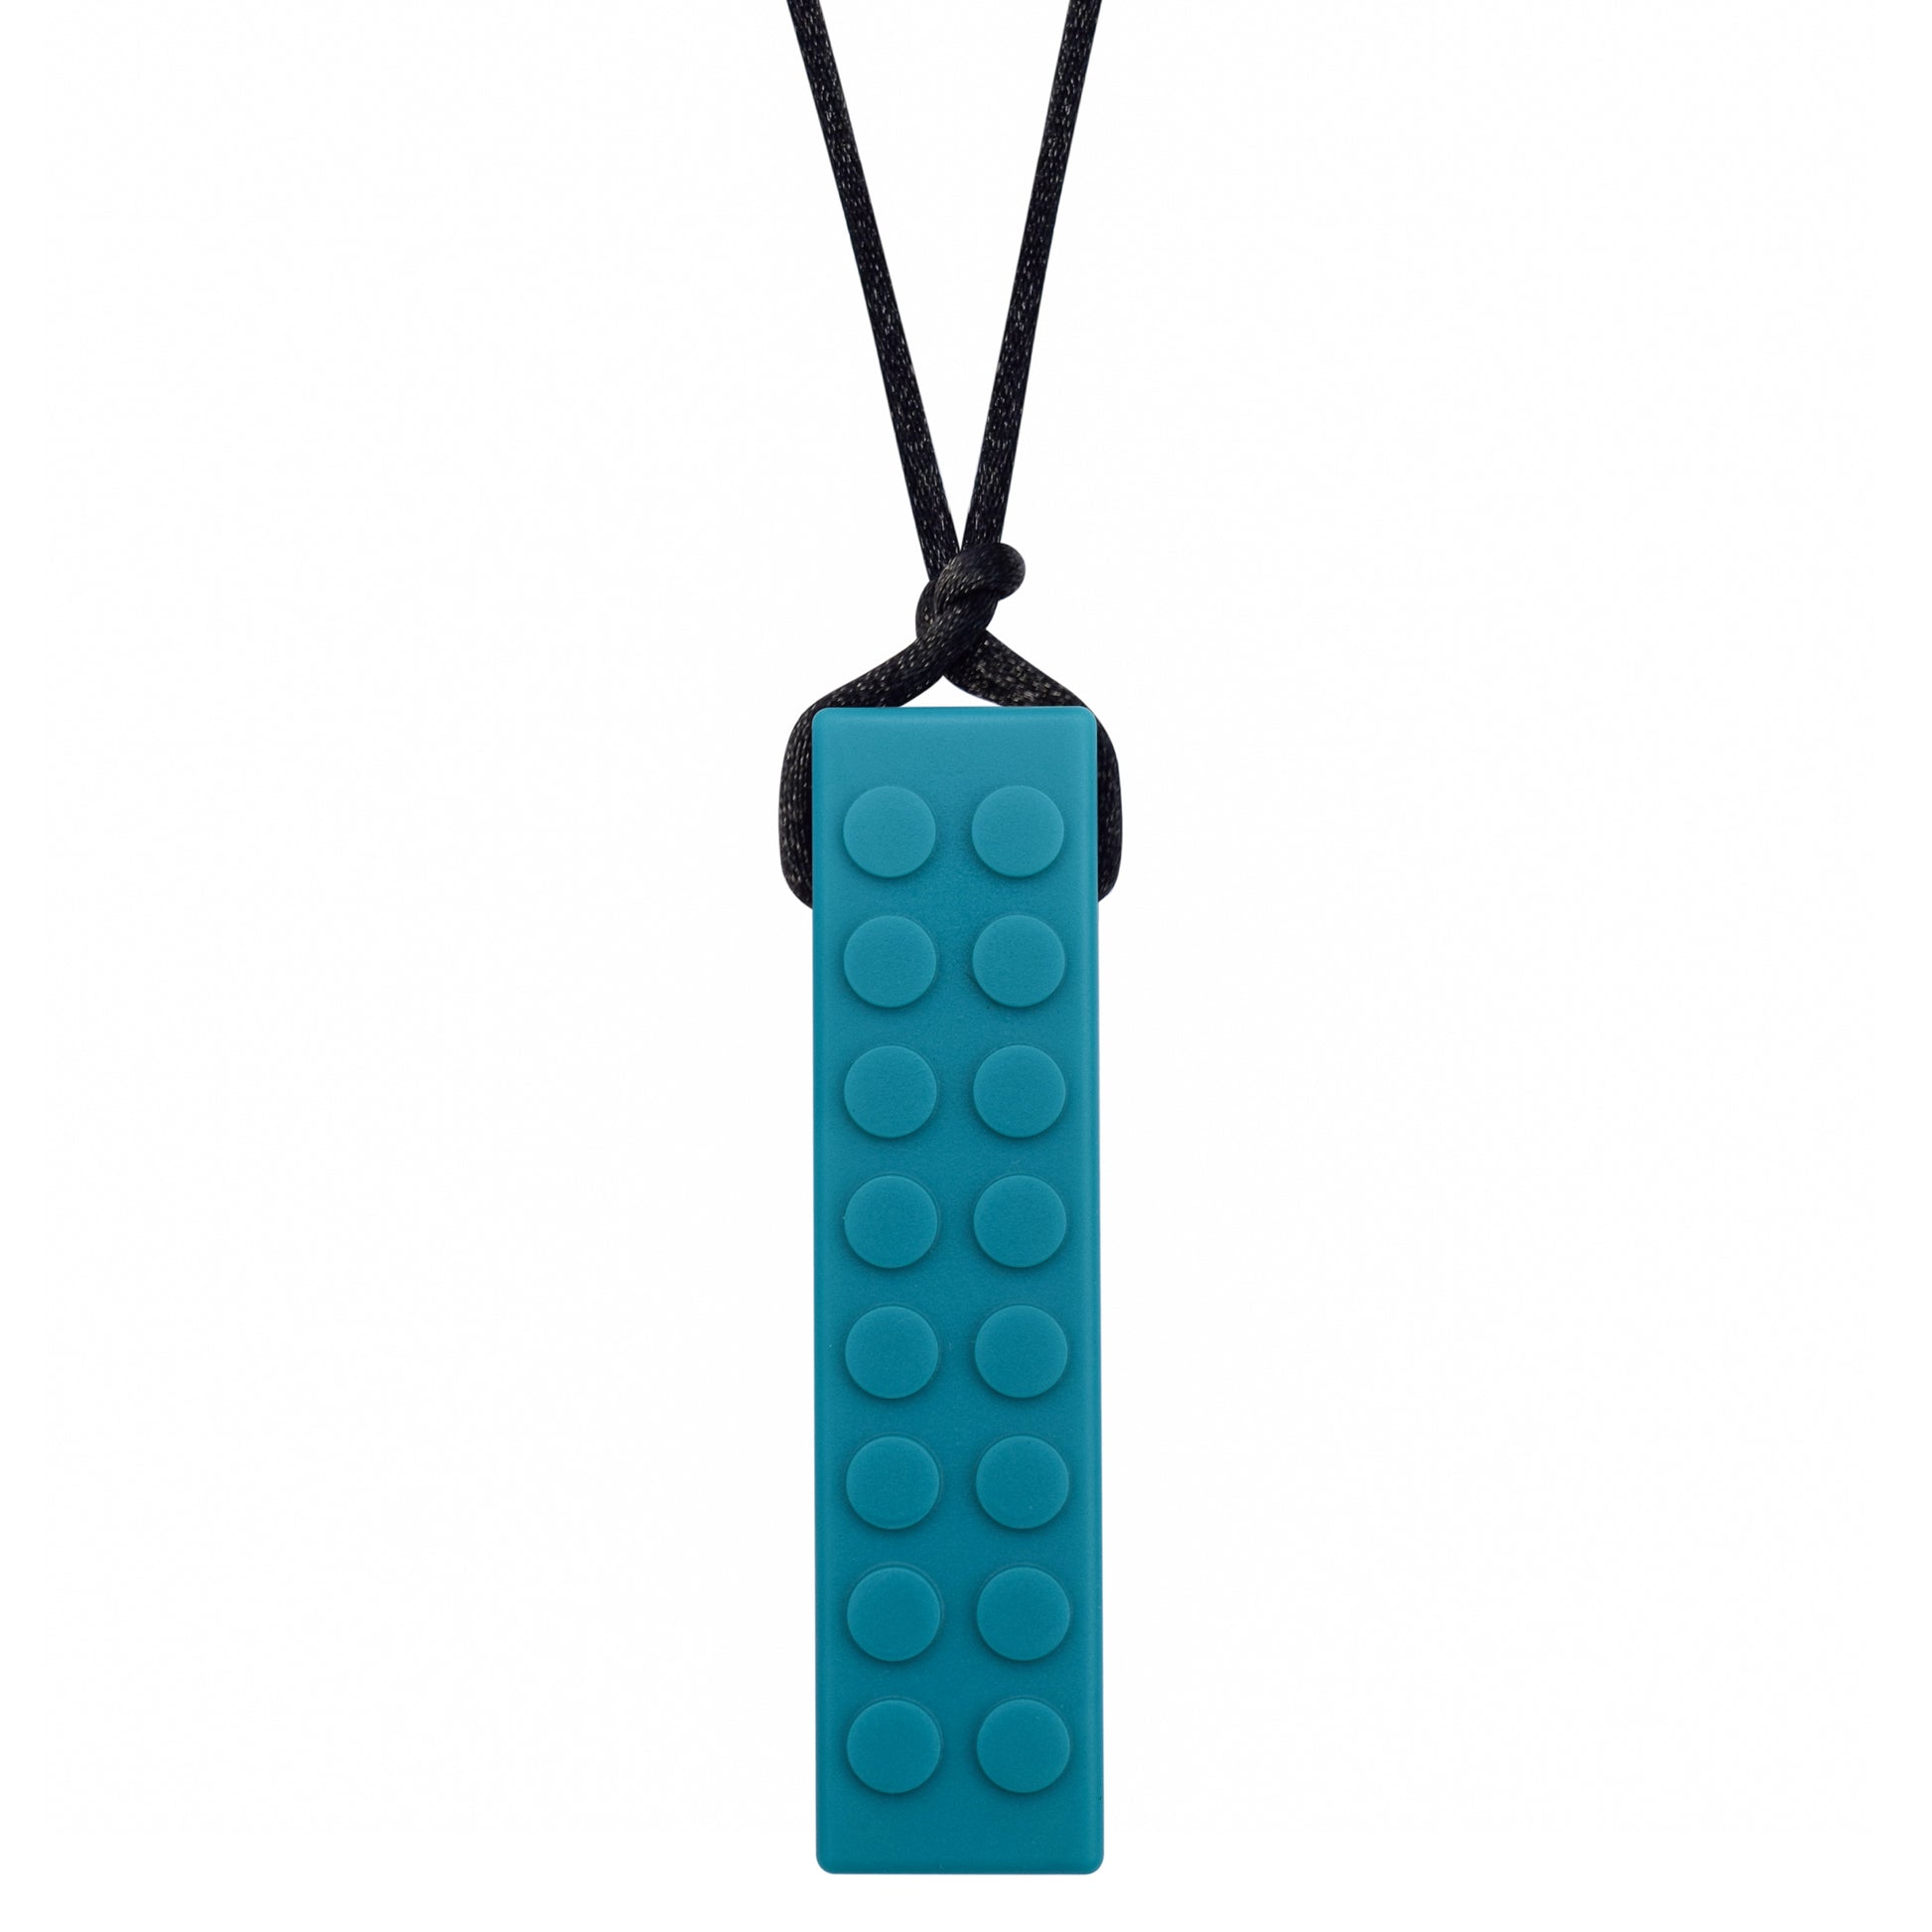 LEGO-like Chew Necklace for girls and boys by Munchables in teal.